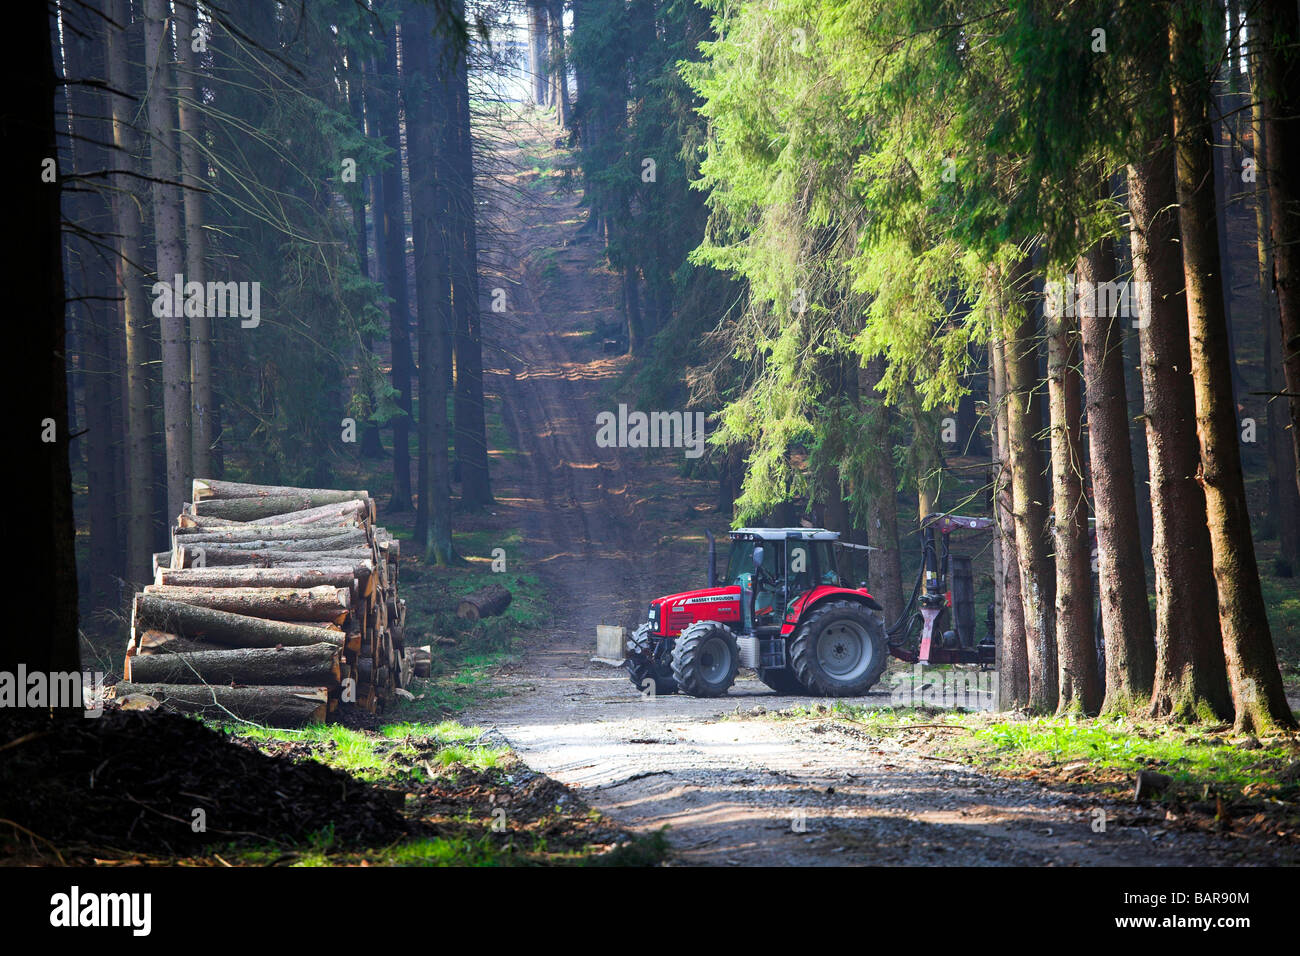 Tractor parked in forest clearing Stock Photo